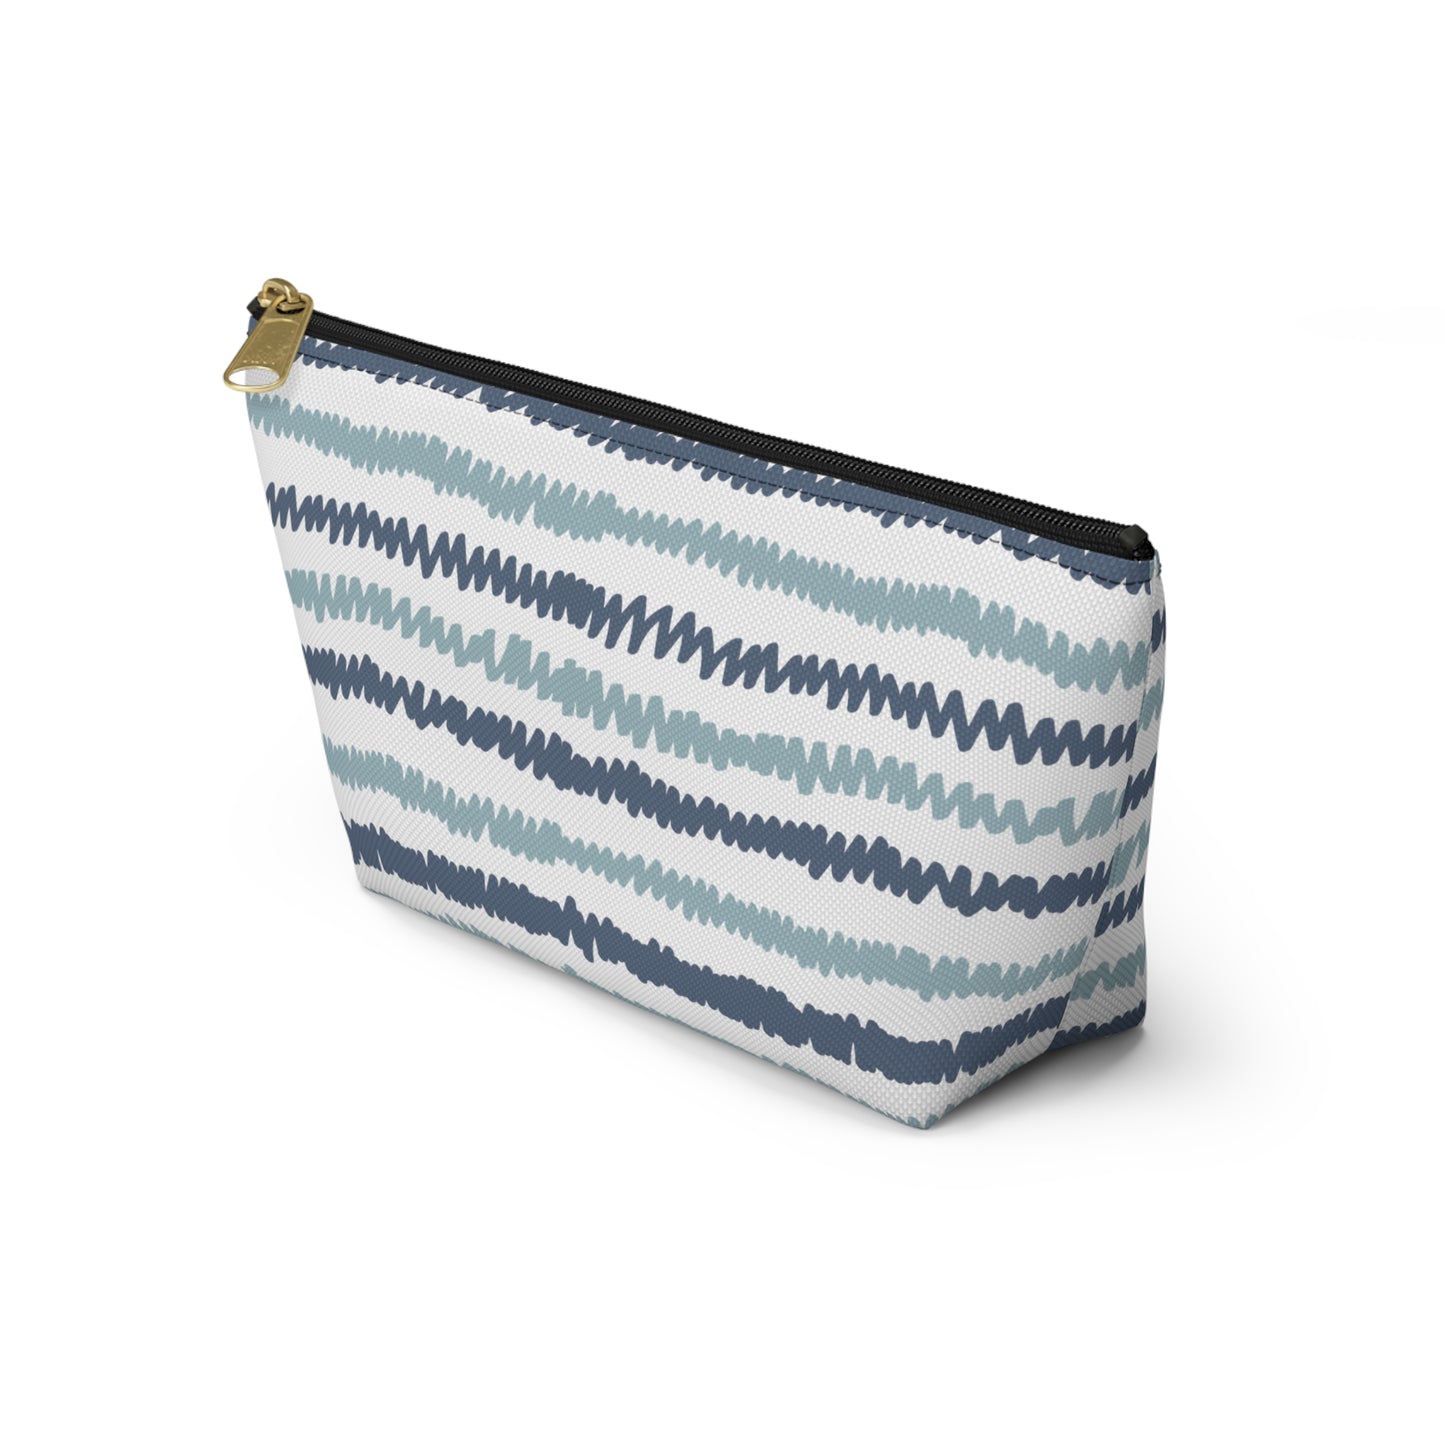 Accessory Pouch - Blue Lines